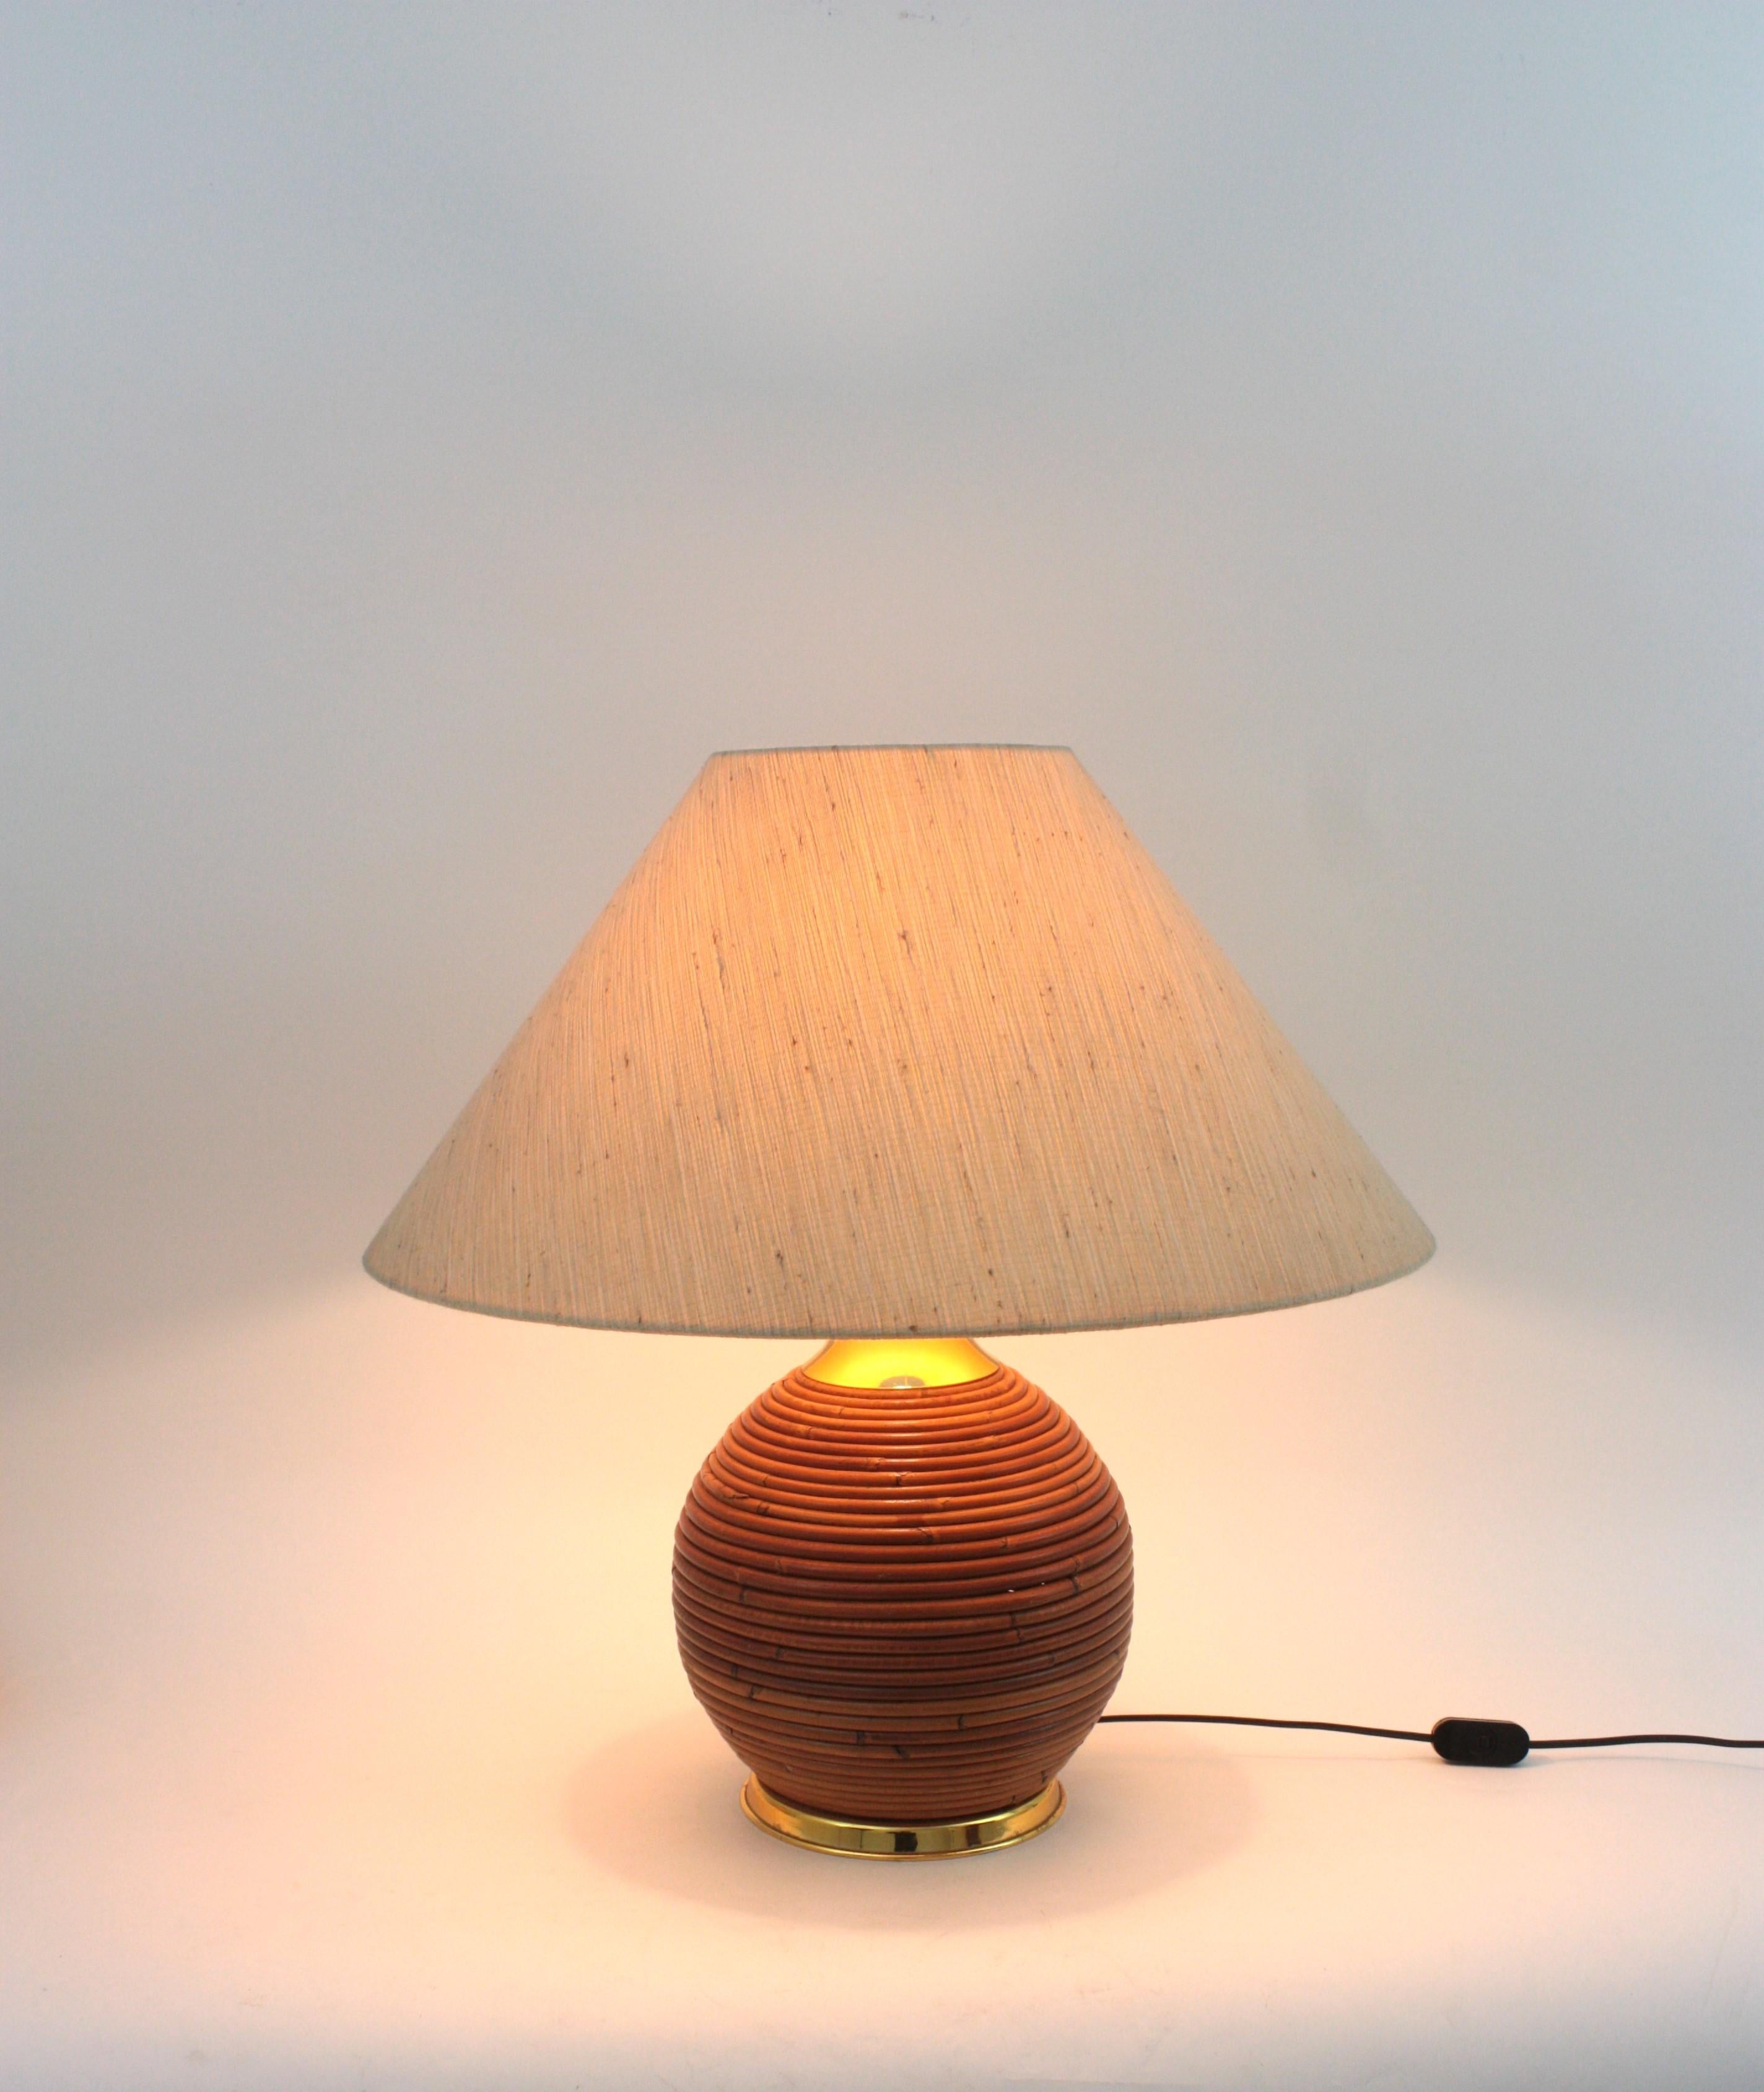 Large Italian Rattan and Brass Ball Table Lamp, 1970s For Sale 8